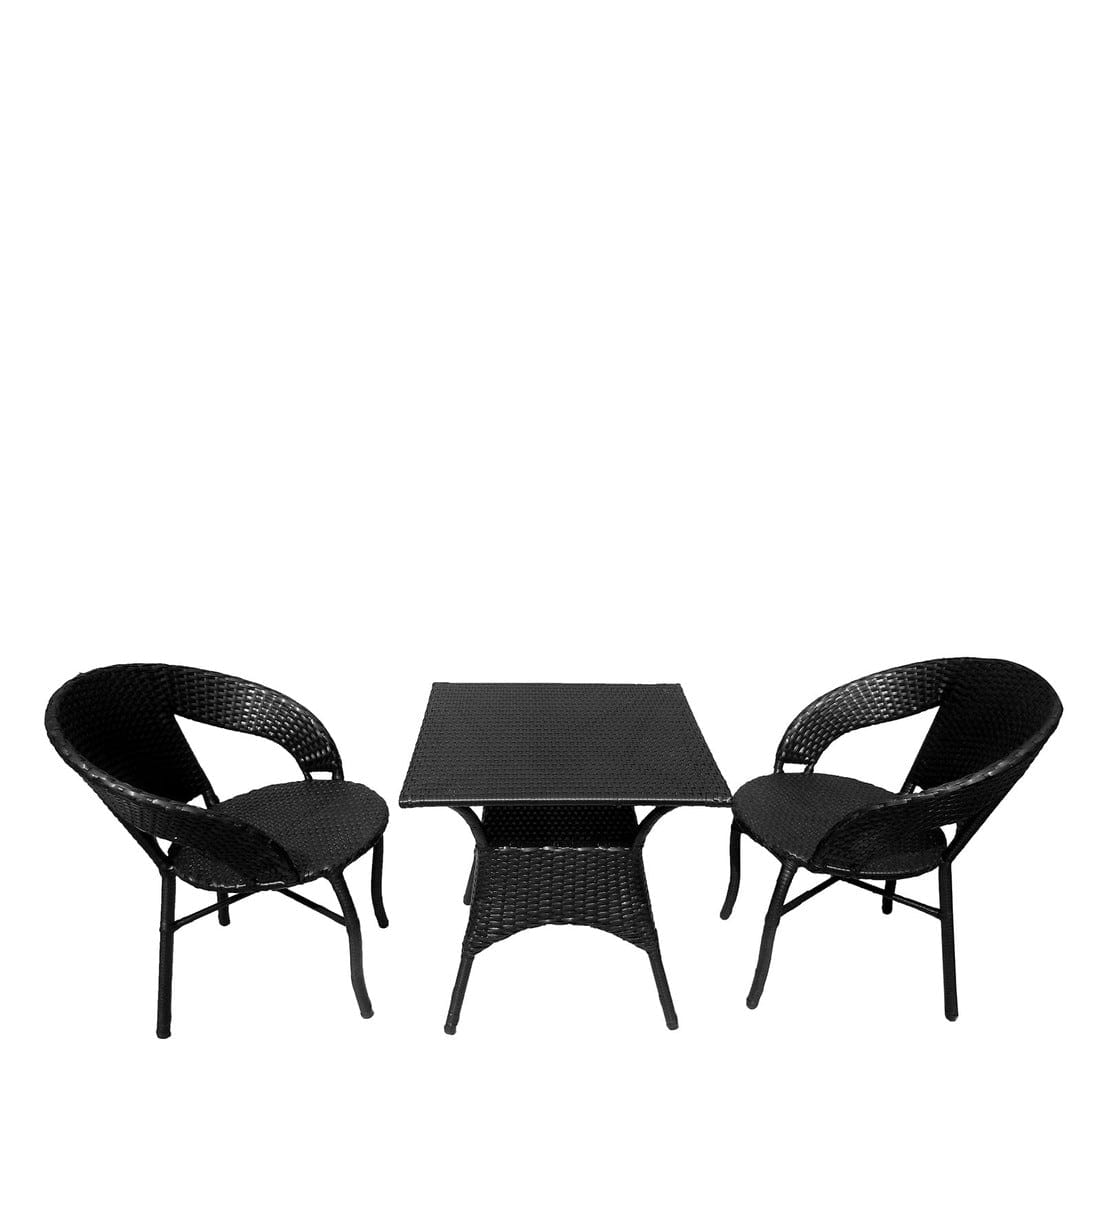 Dreamline Outdoor Furniture Garden Patio Coffee Table Set(1+2), 2 Chairs And Table Set (Black)